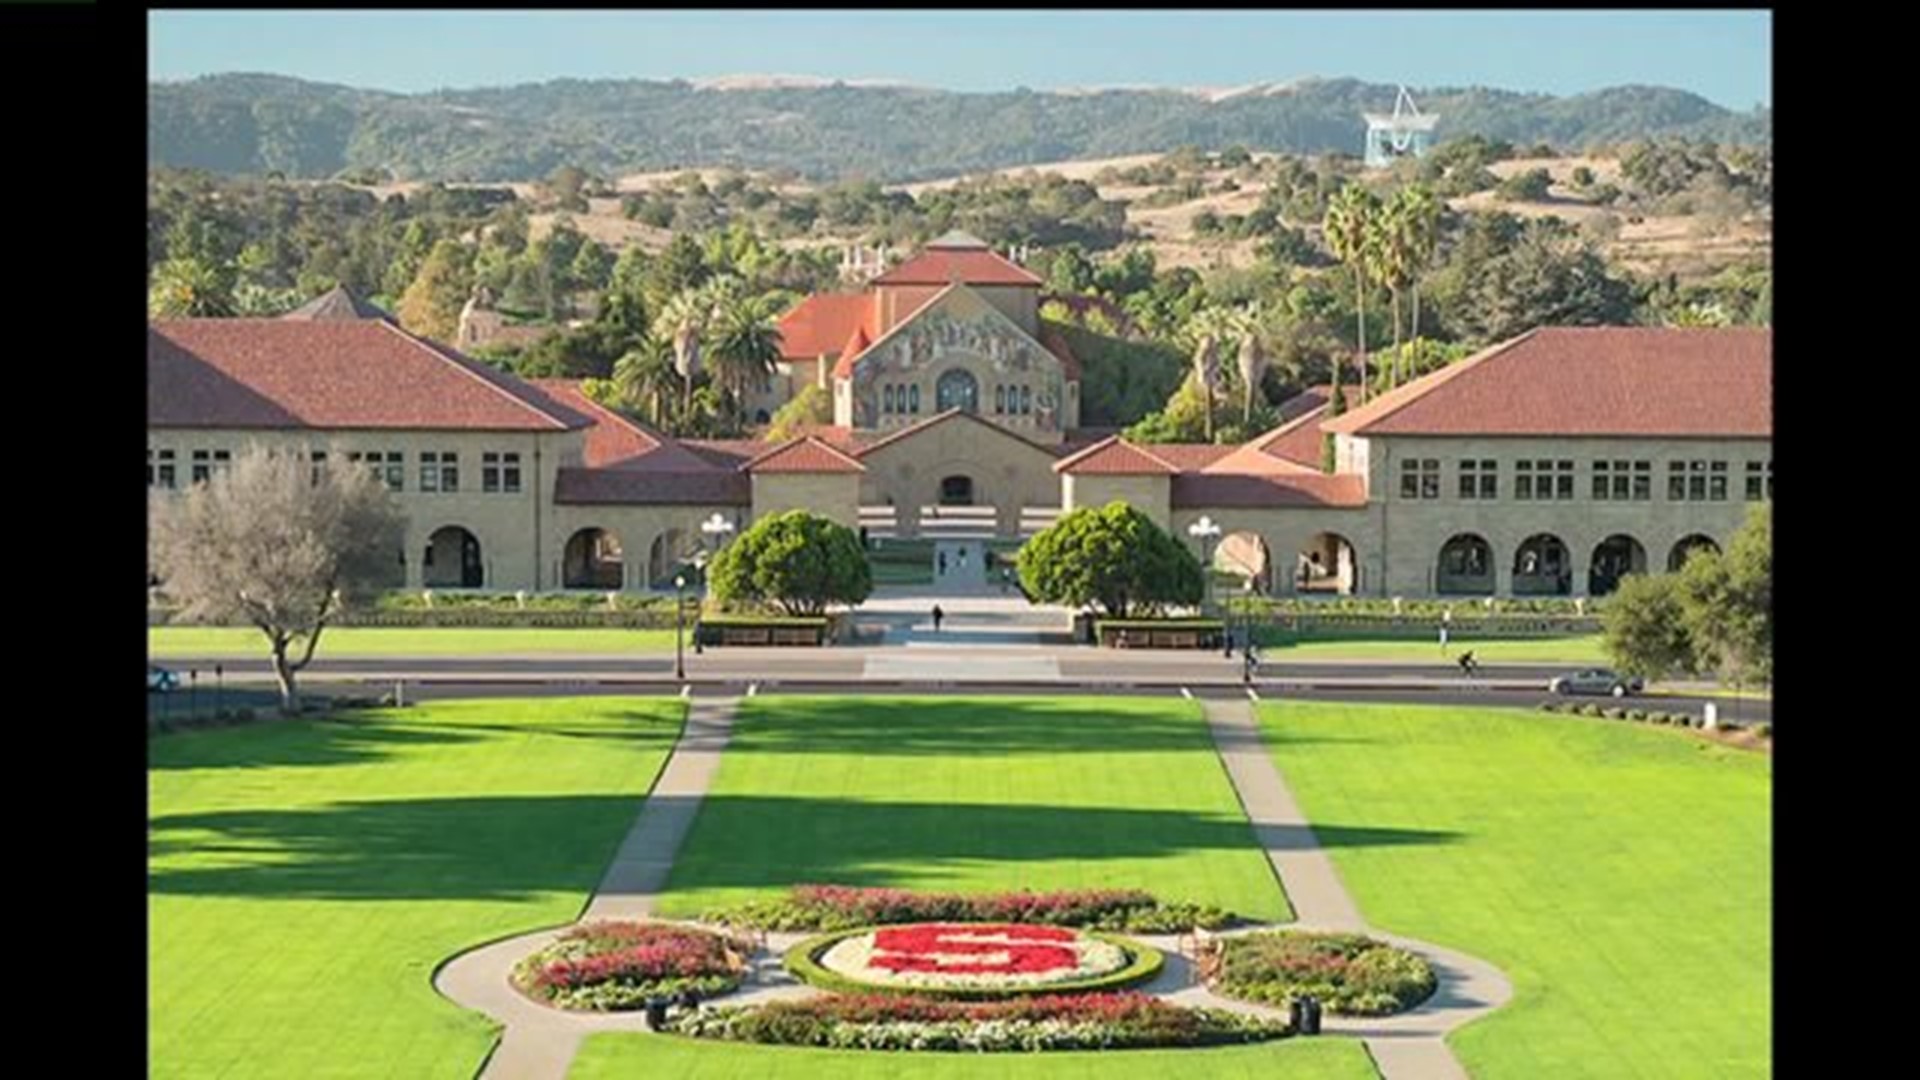 Free tuition at Stanford